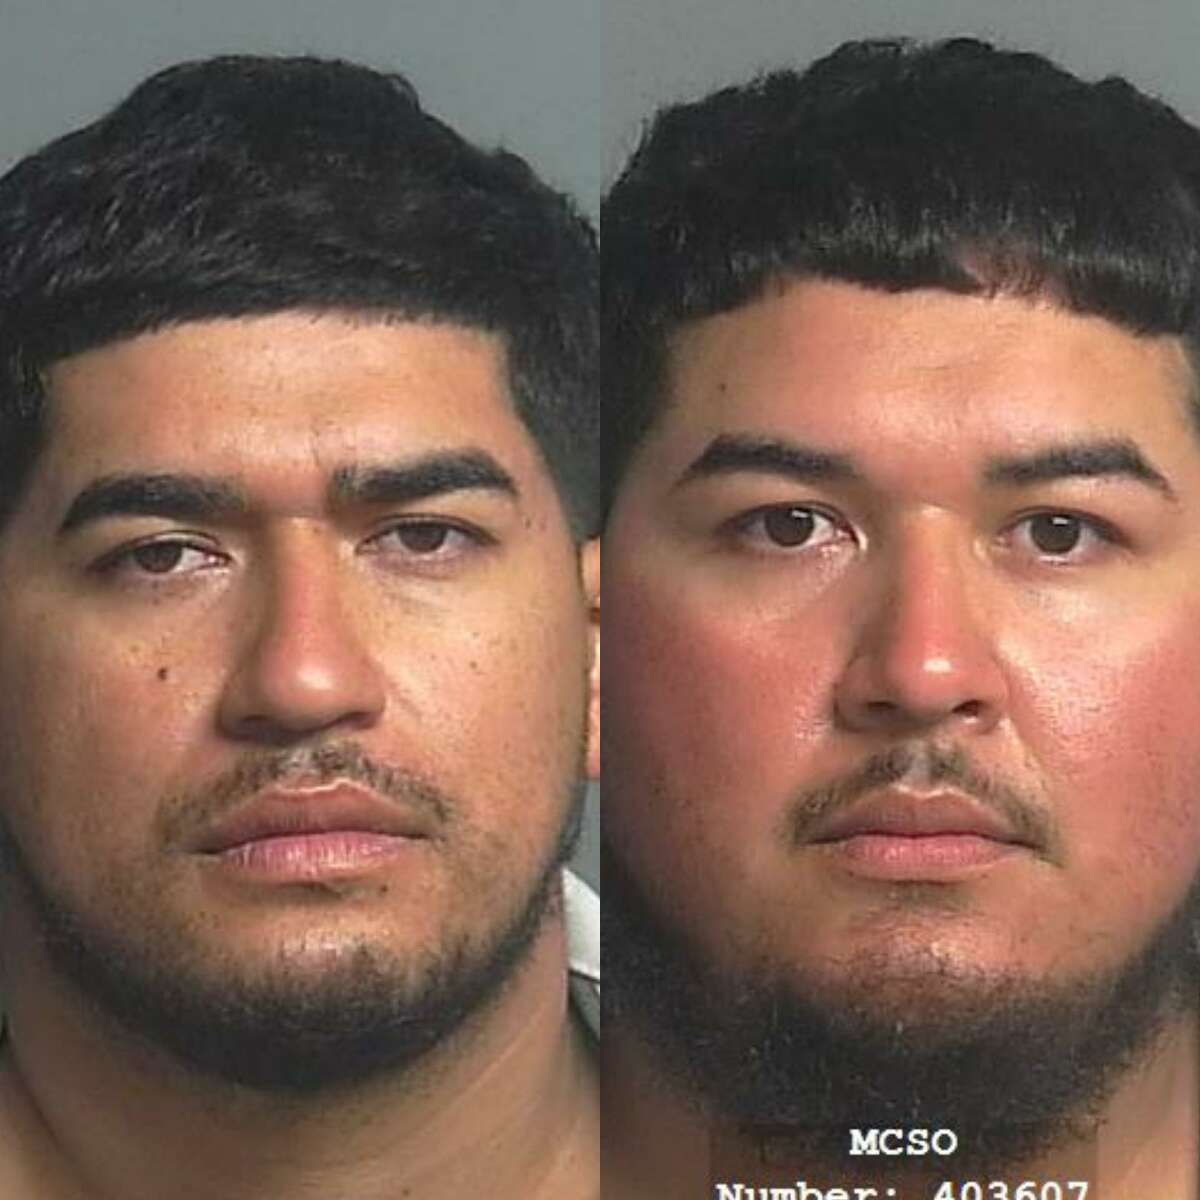 Abel Arana, 33, of Dallas, left, and Gustavo Adolfo Arana, 28, of Conroe, are charged with impersonation of a public servant, a third-degree felony. Gustavo Arana is also being charged with unlawful carrying of a weapon.